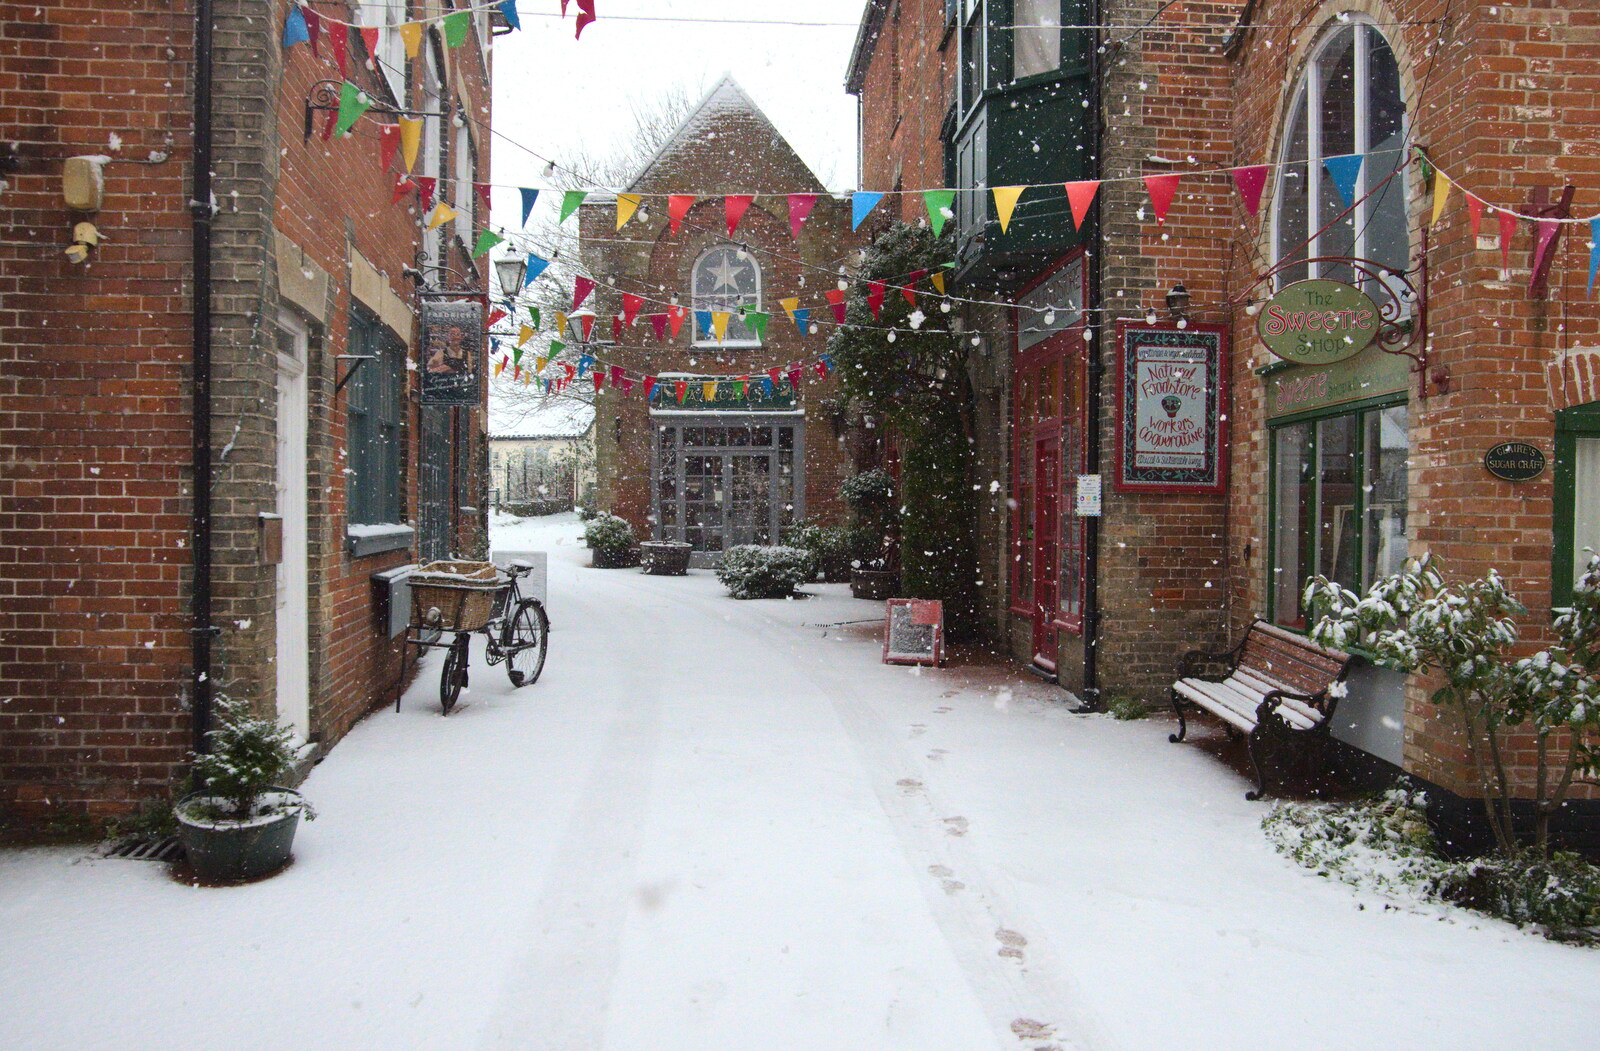 Norfolk House Yard from A Snowy Morning, Diss, Norfolk - 16th January 2021